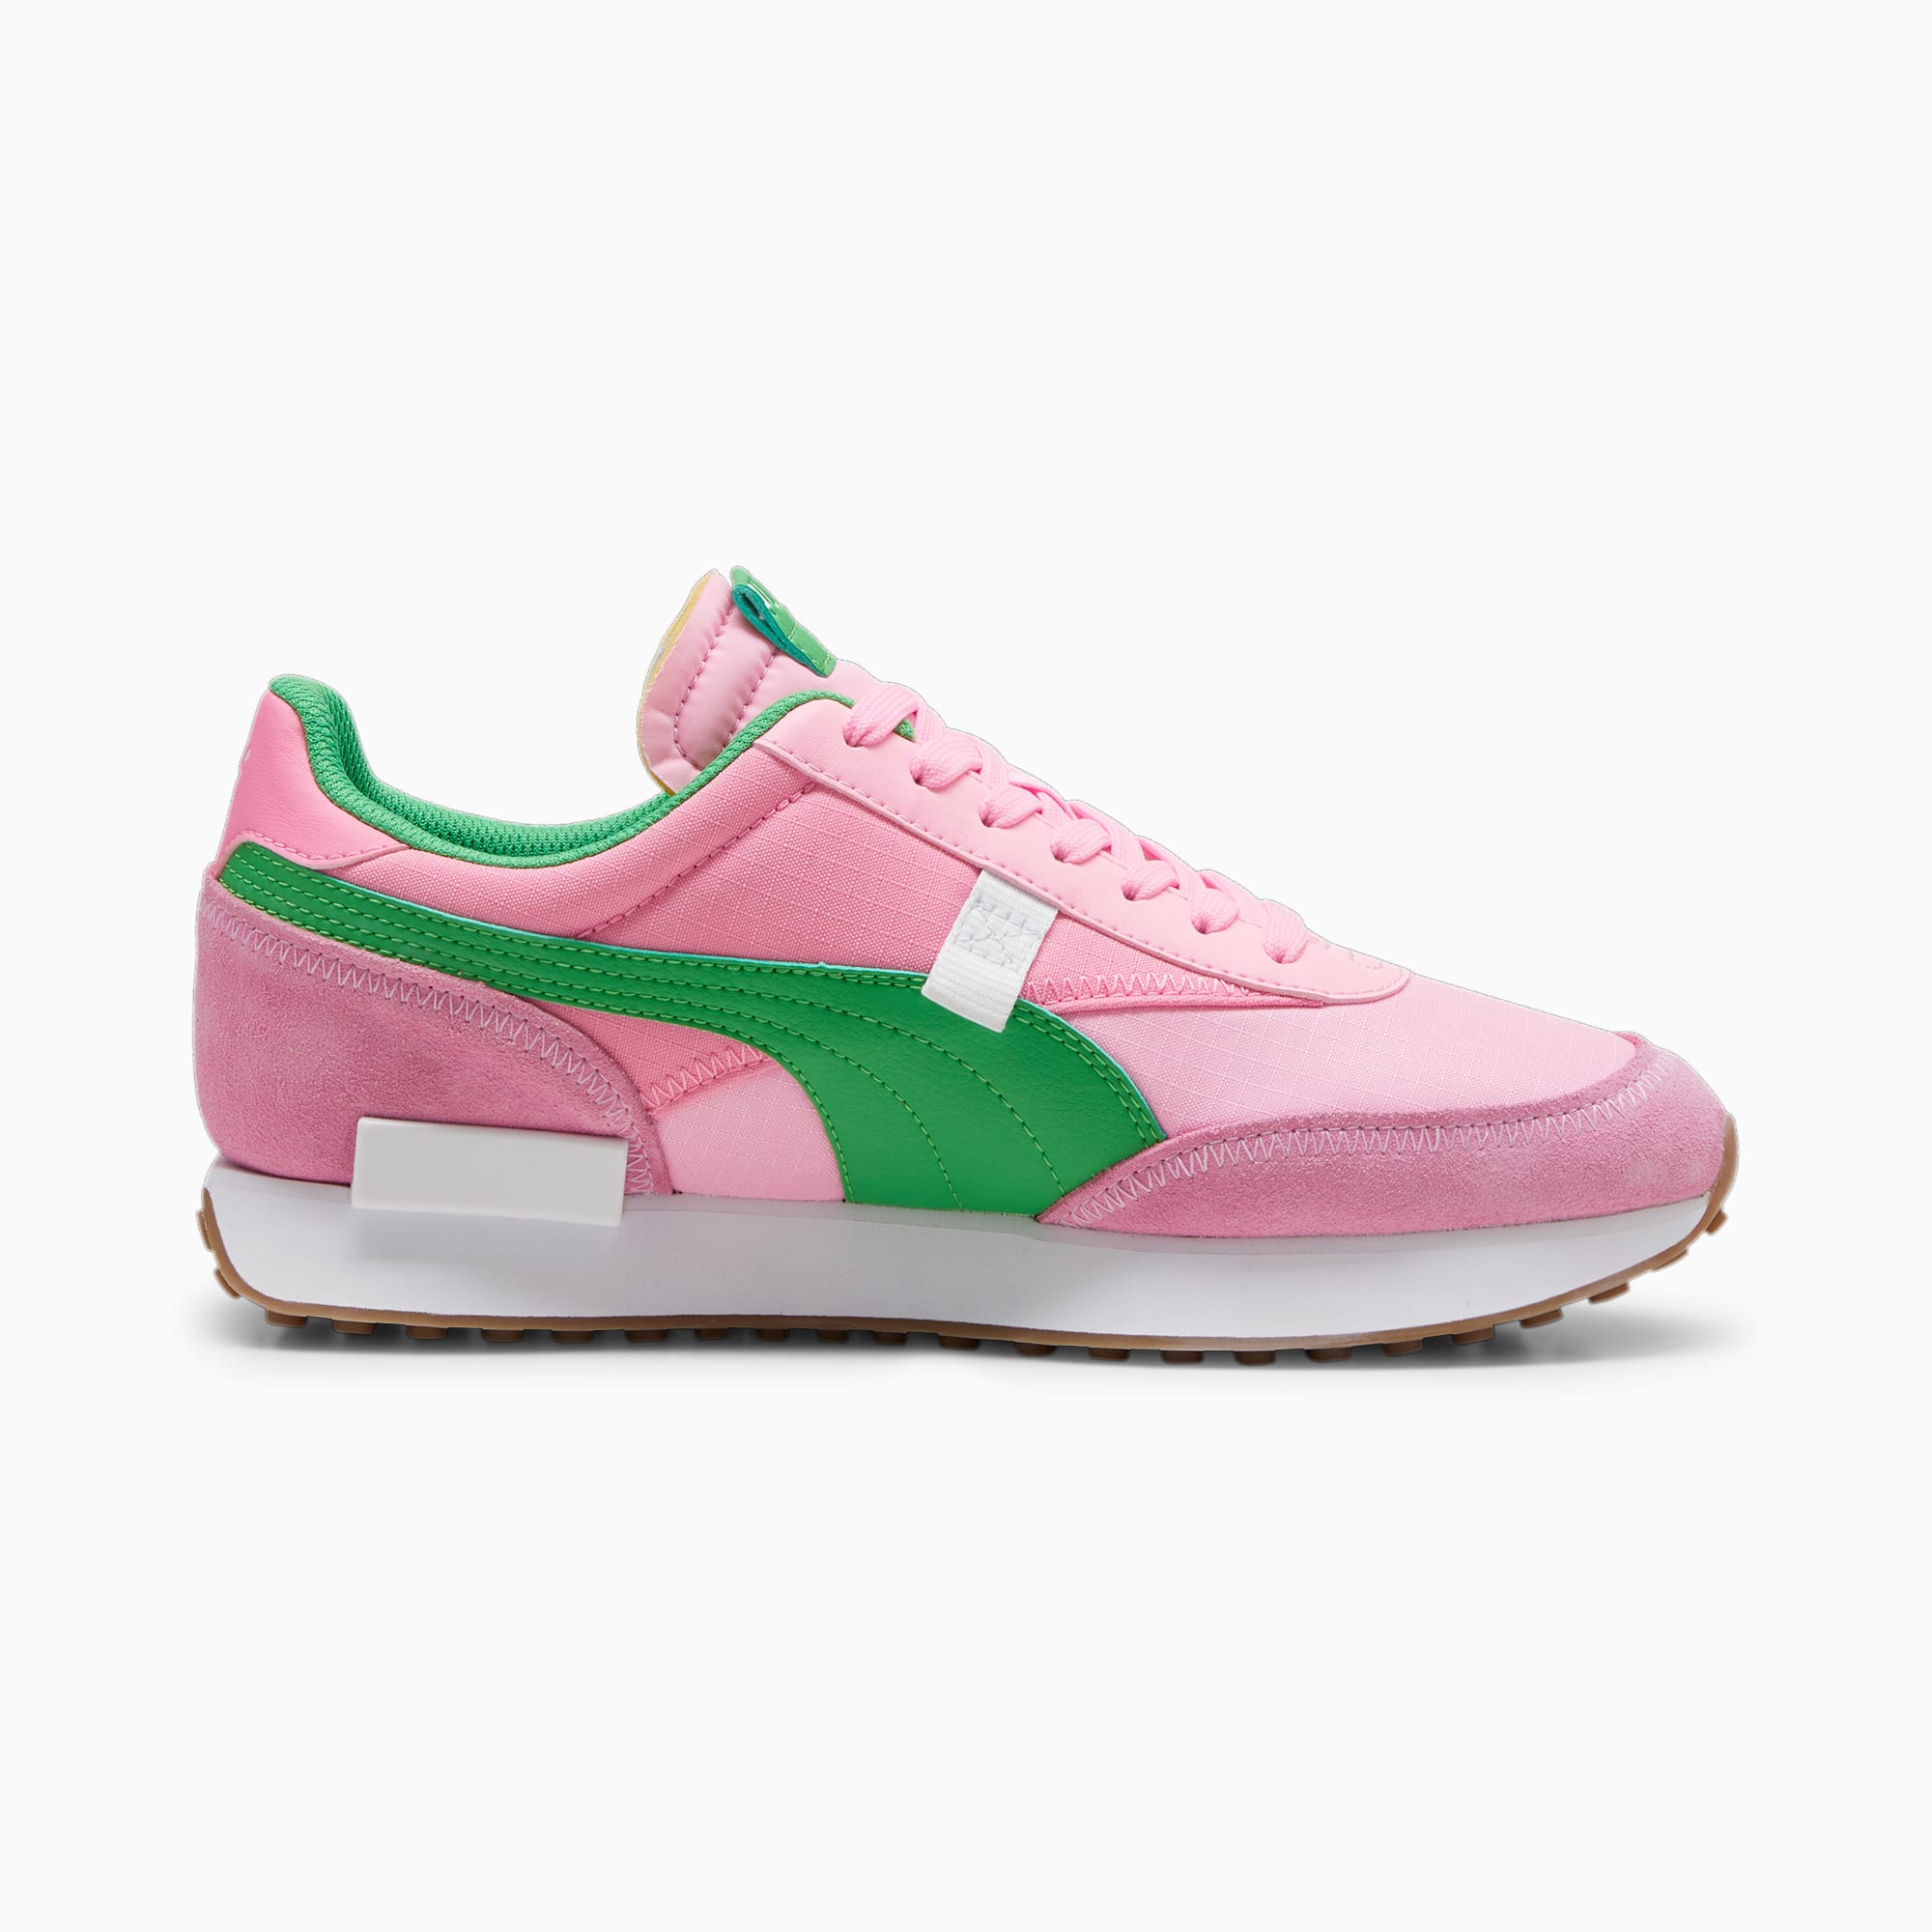 Women's PUMA Future Rider Play On Sneakers, Pink Delight/Green, Size 35,5, Shoes